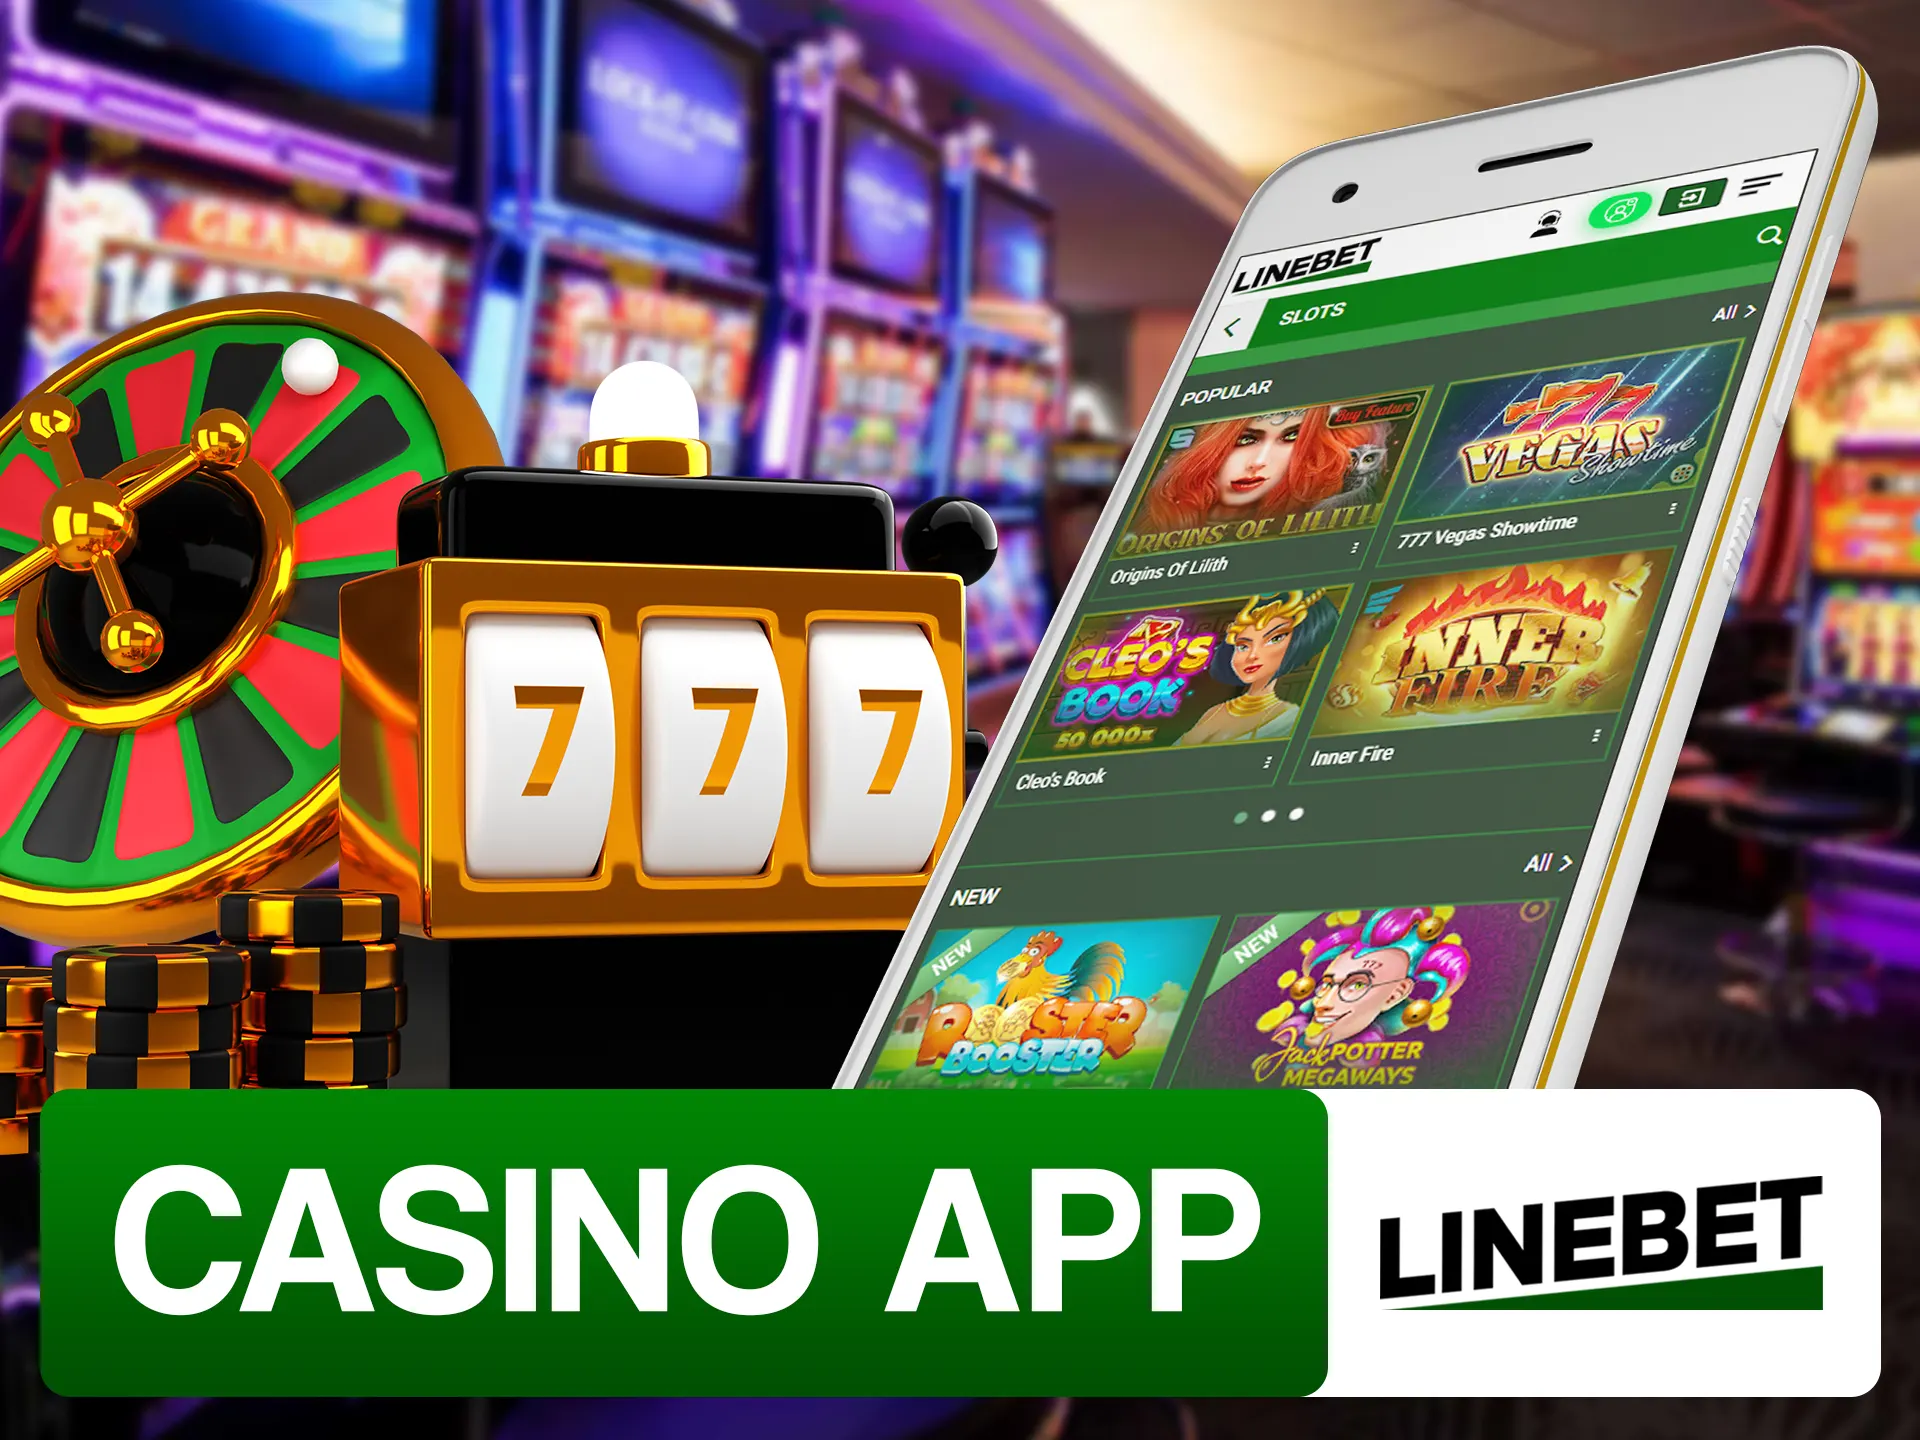 Play Linebet casino in app with ejoyment.